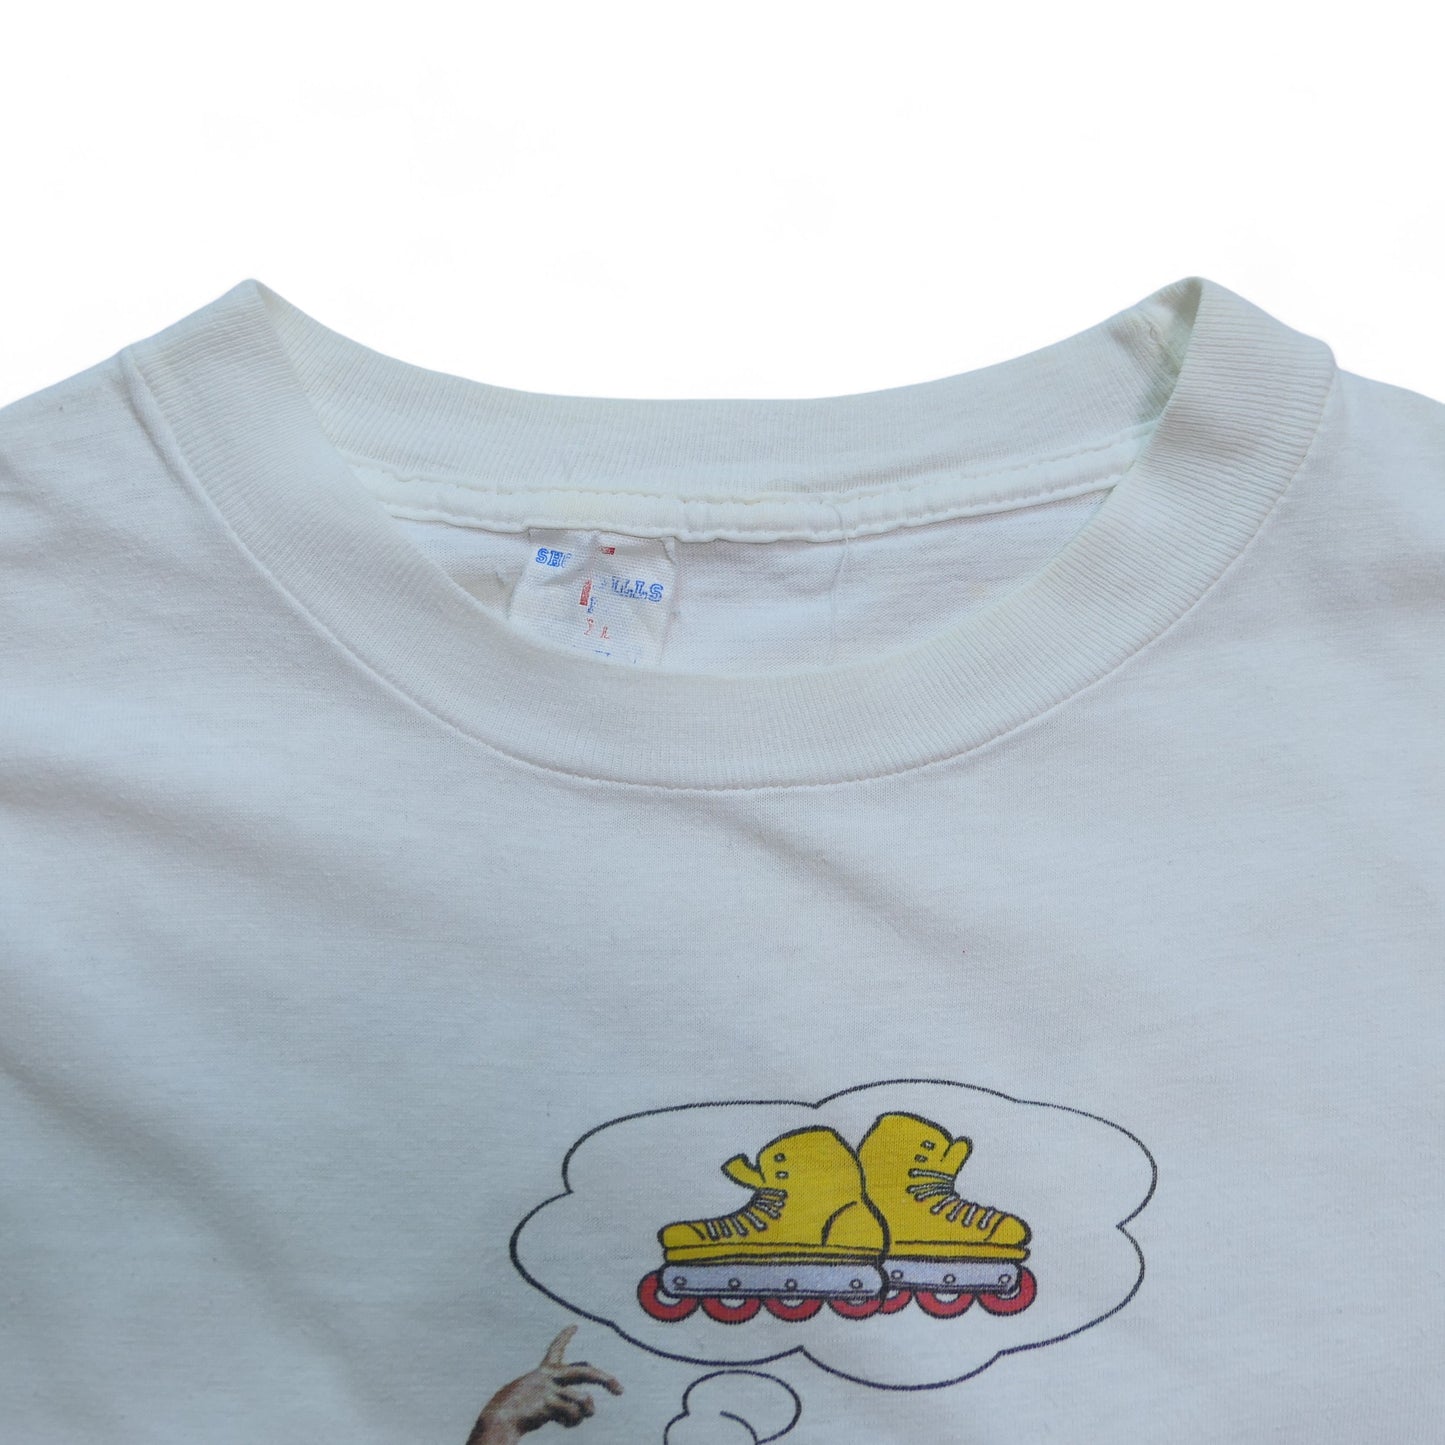 VINTAGE 90s XL Promotion Tee -DISCOVER CARD-